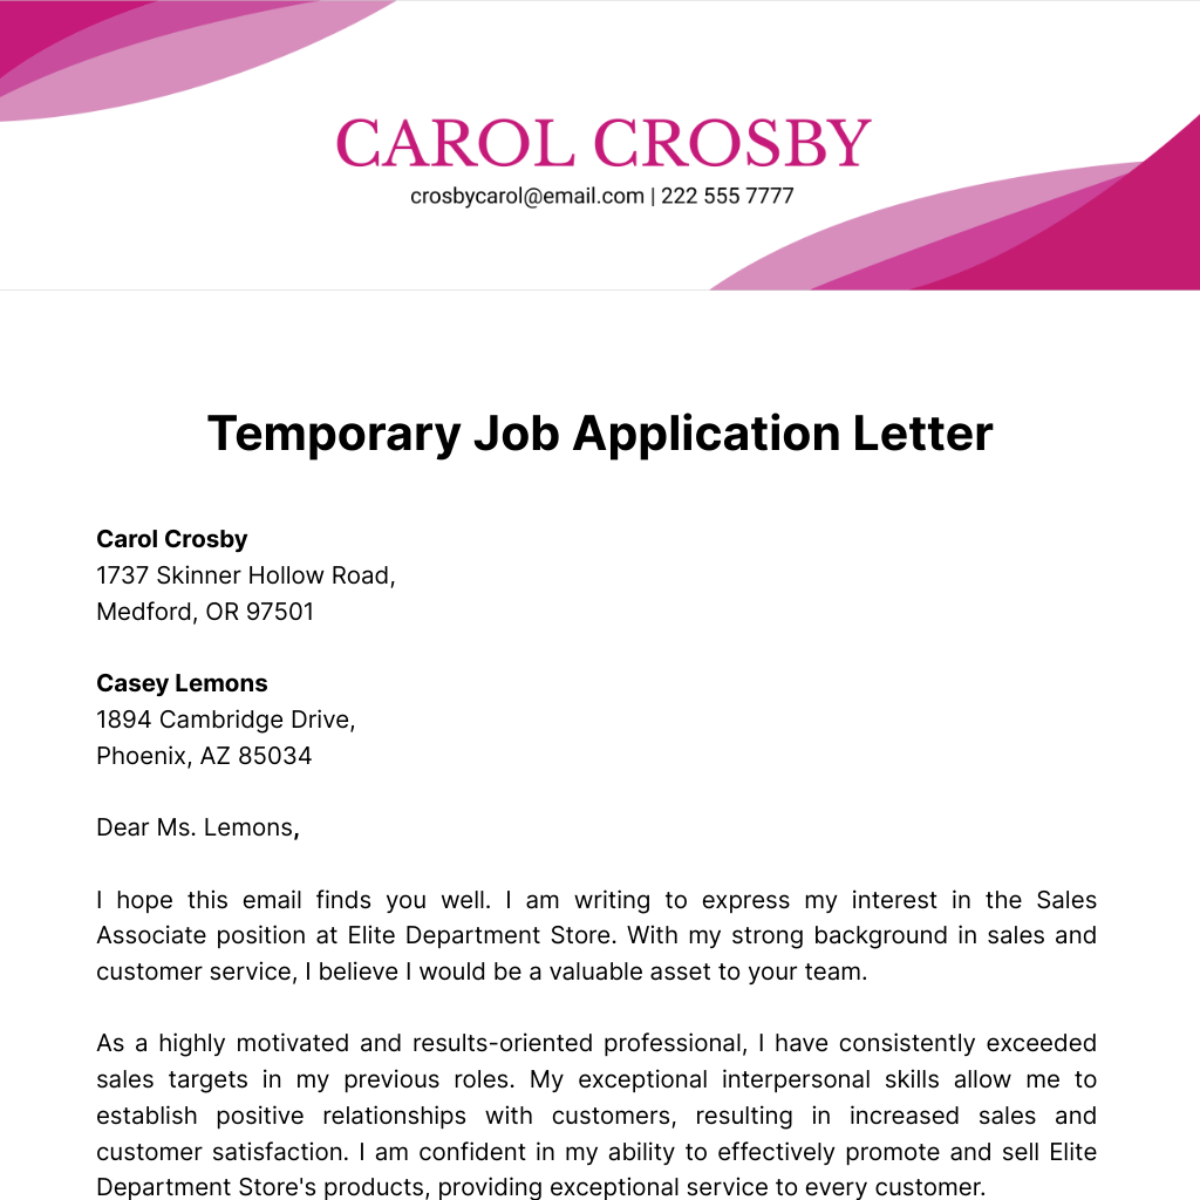 Temporary Job Application Letter  Template